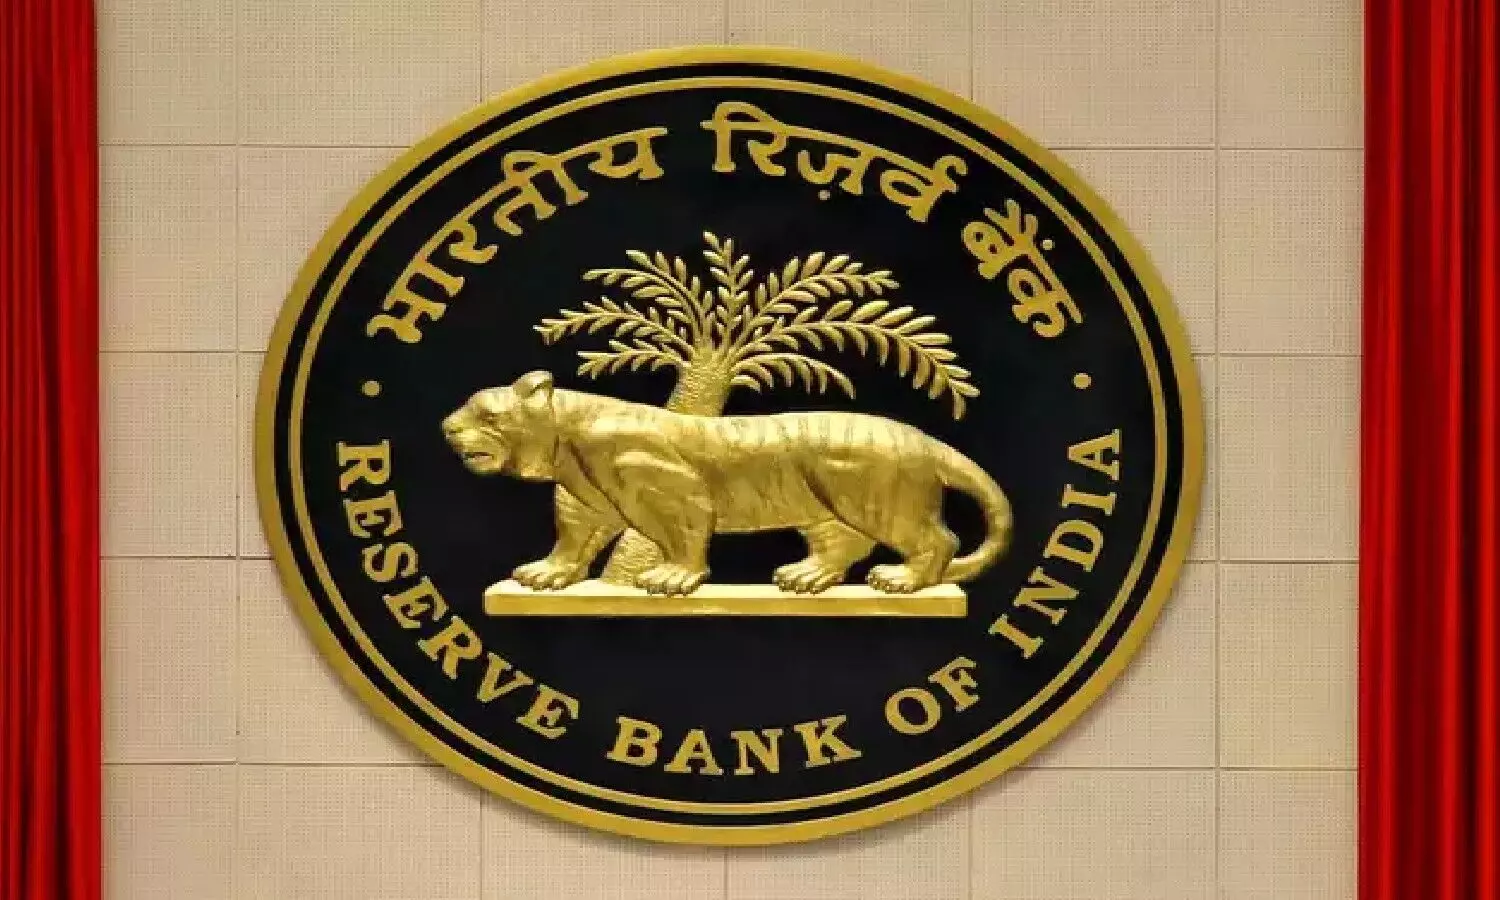 Every year the central bank Reserve Bank of India presents its annual report on all aspects related to the Indian economy.